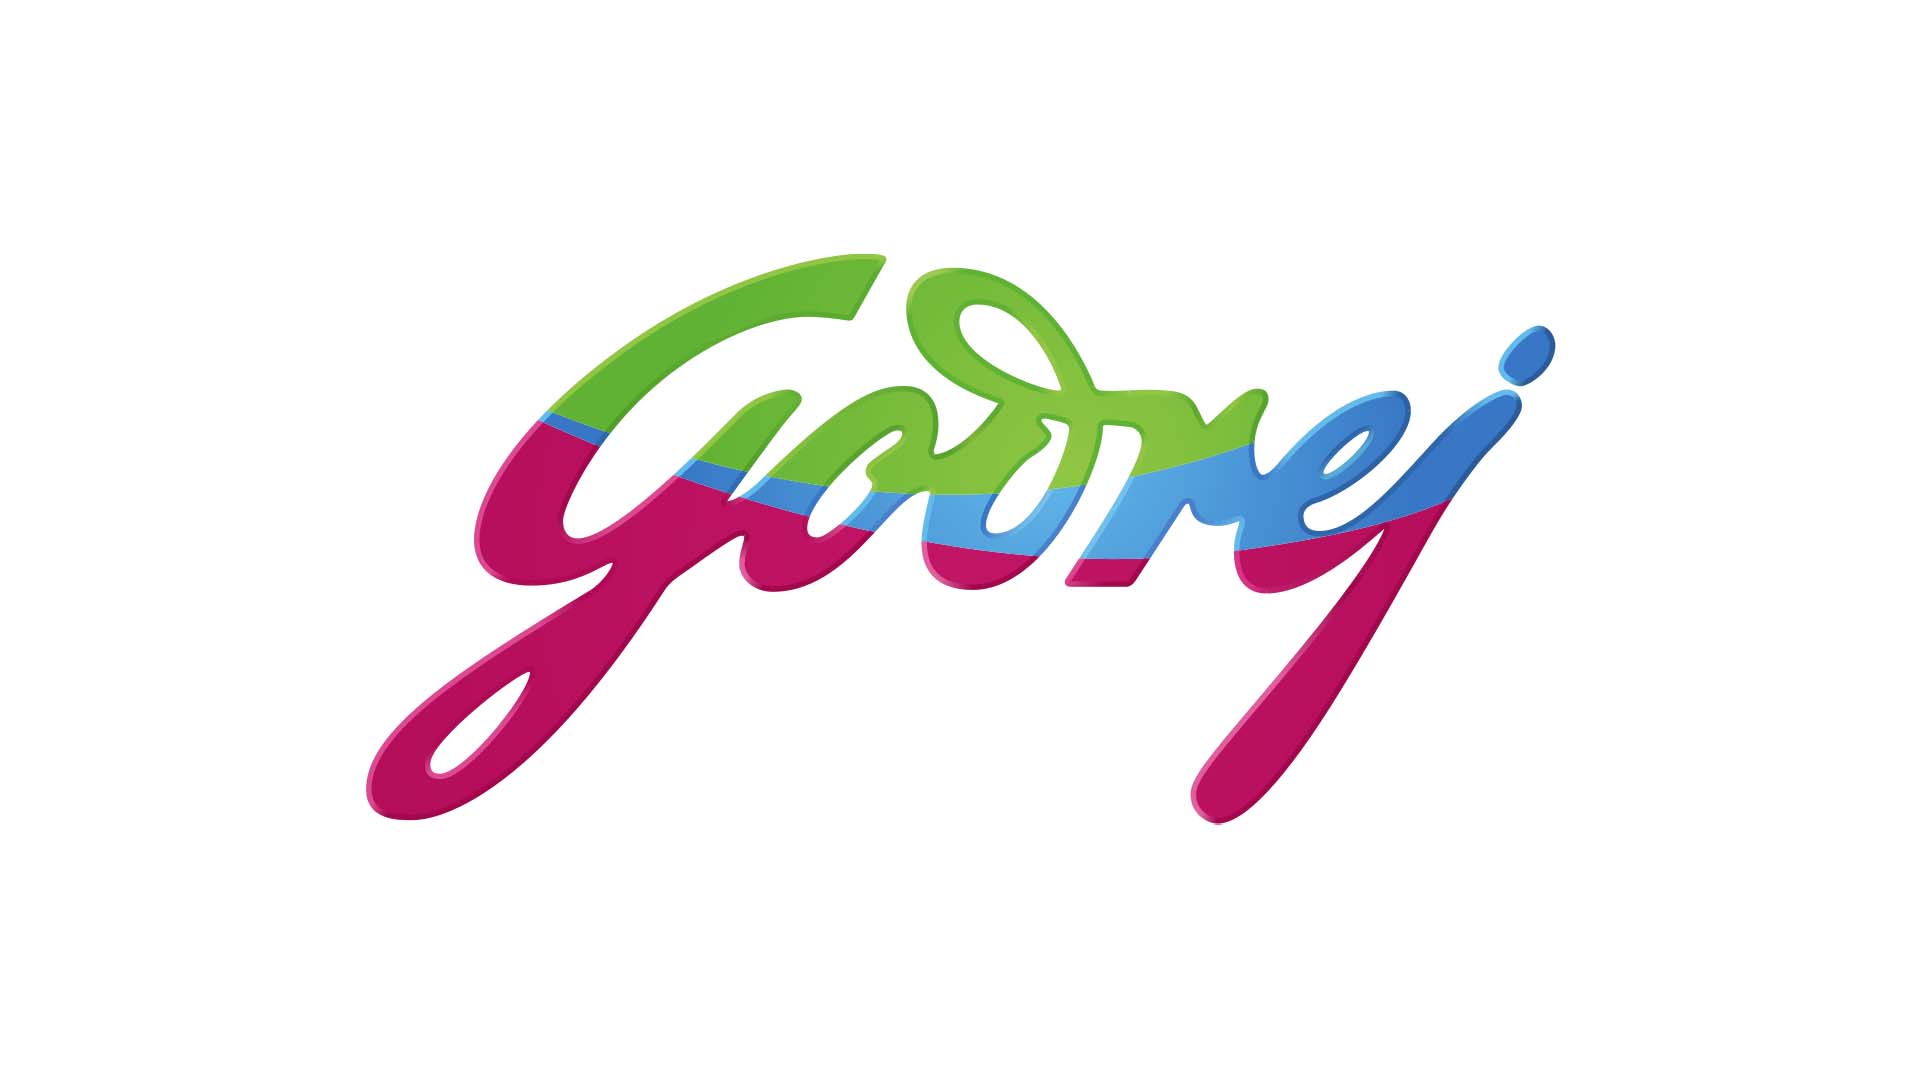 Godrej Properties' shares surge by nearly 5% to hit a new 1-year high